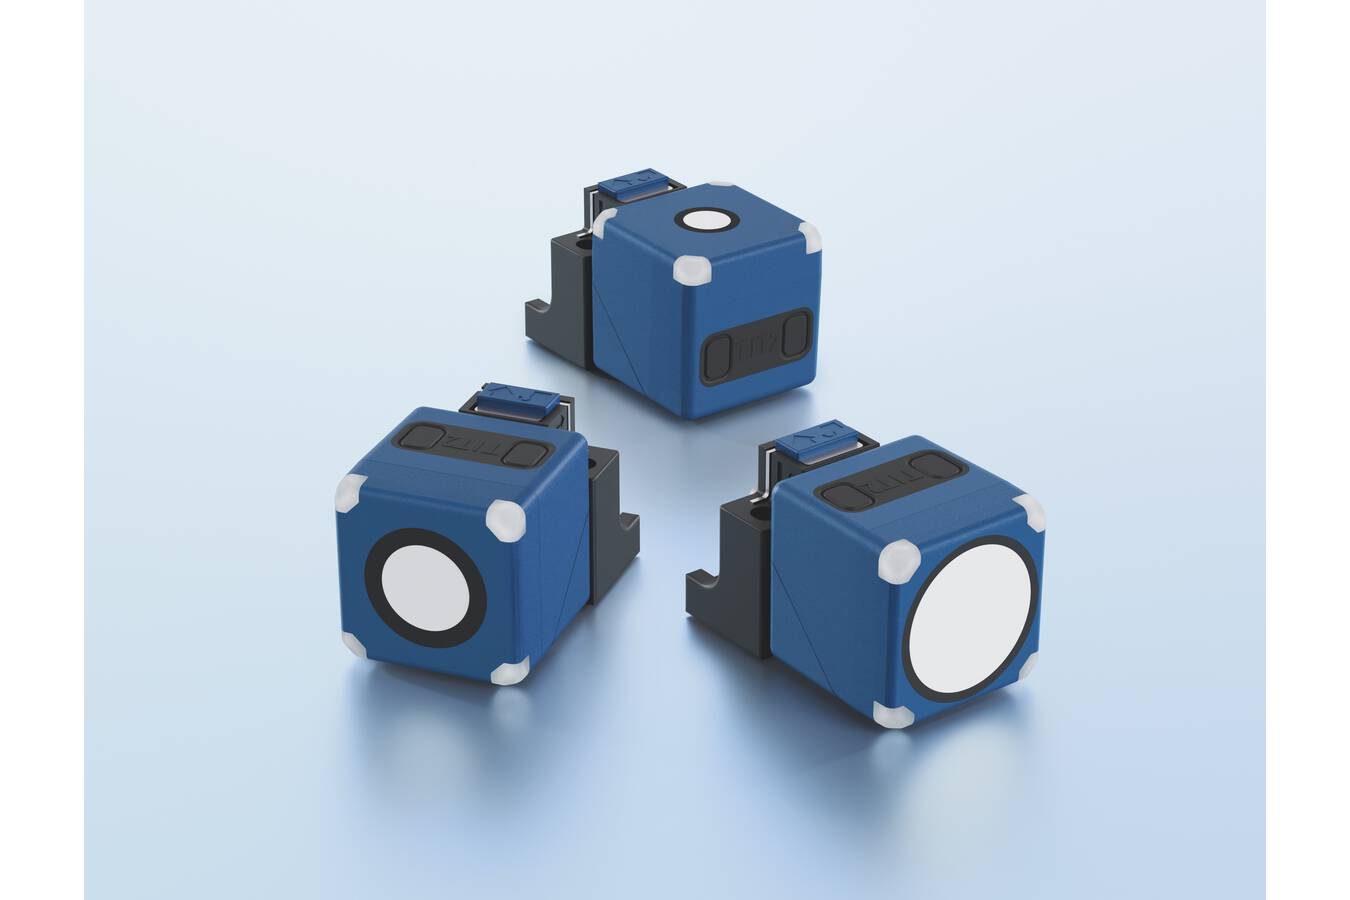 Cube ultrasonic sensors, also for level measurements The rotatable sensor head of the sensors permit their alignment in five radiation directions and enable ideal adaptation to different applications and installation conditions.